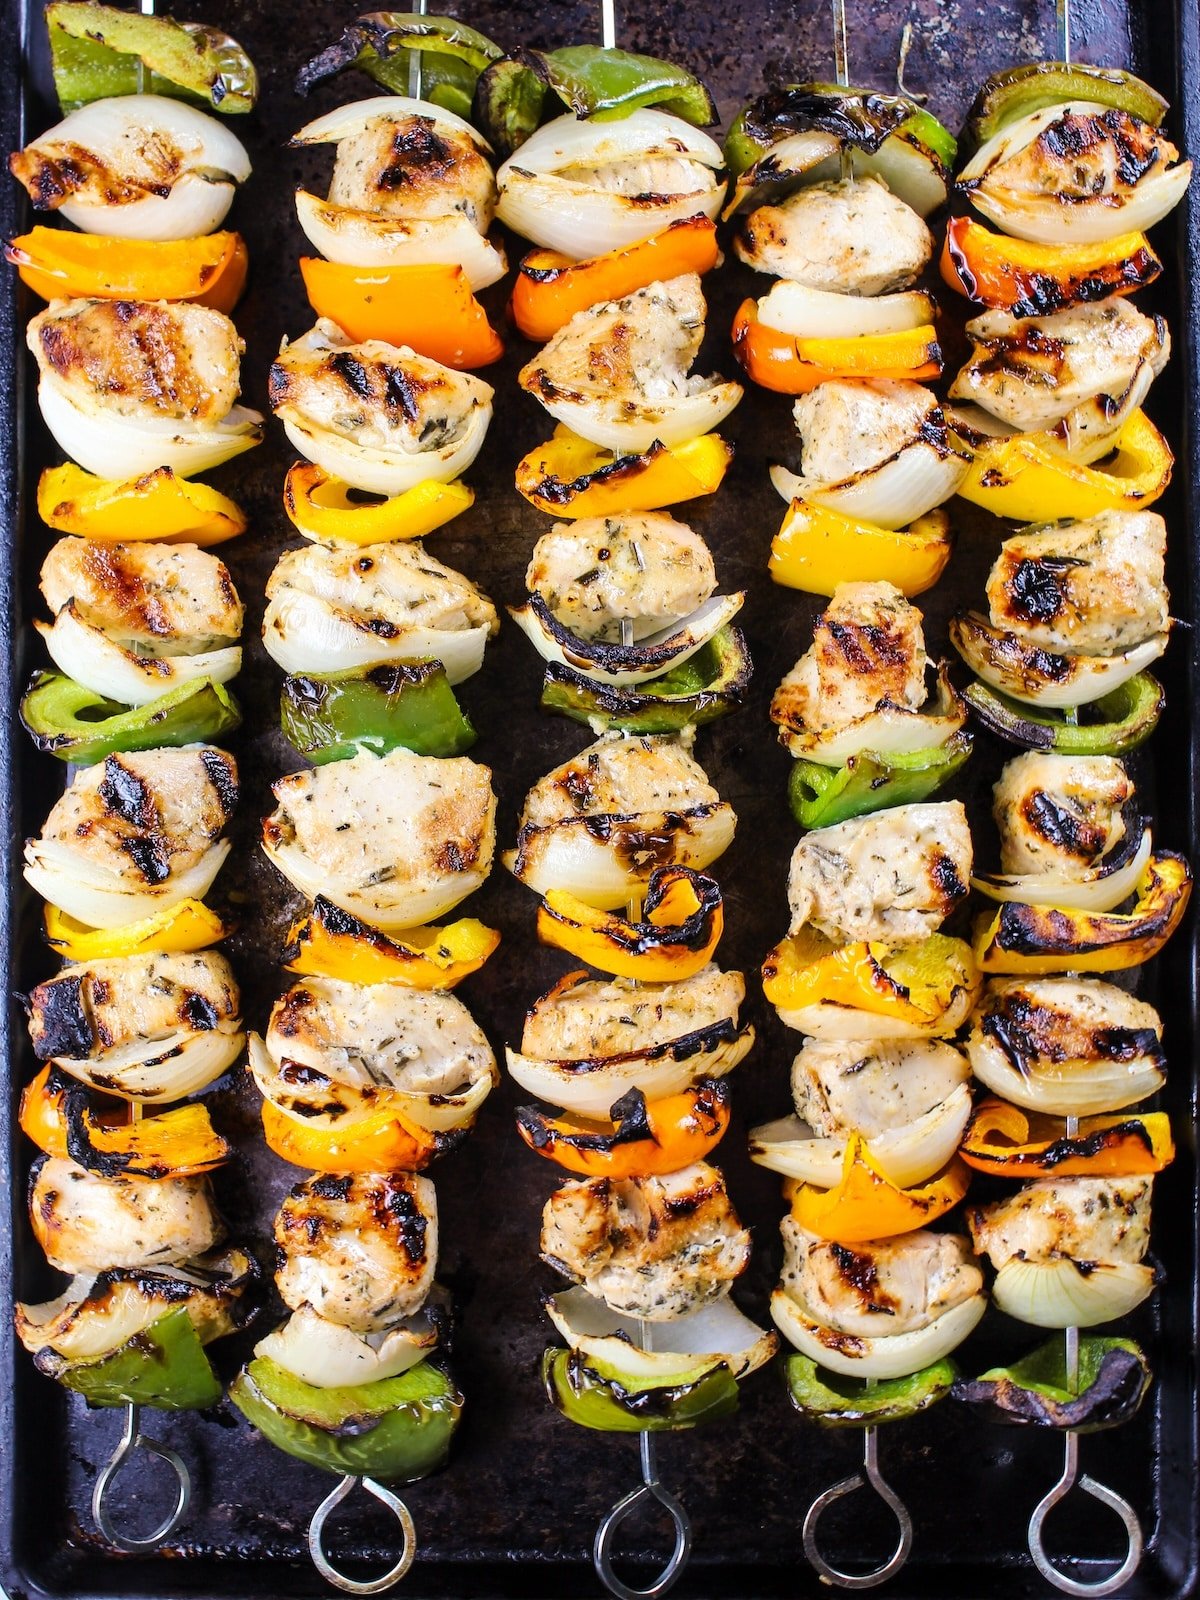 Grilled kabobs on a baking sheet.